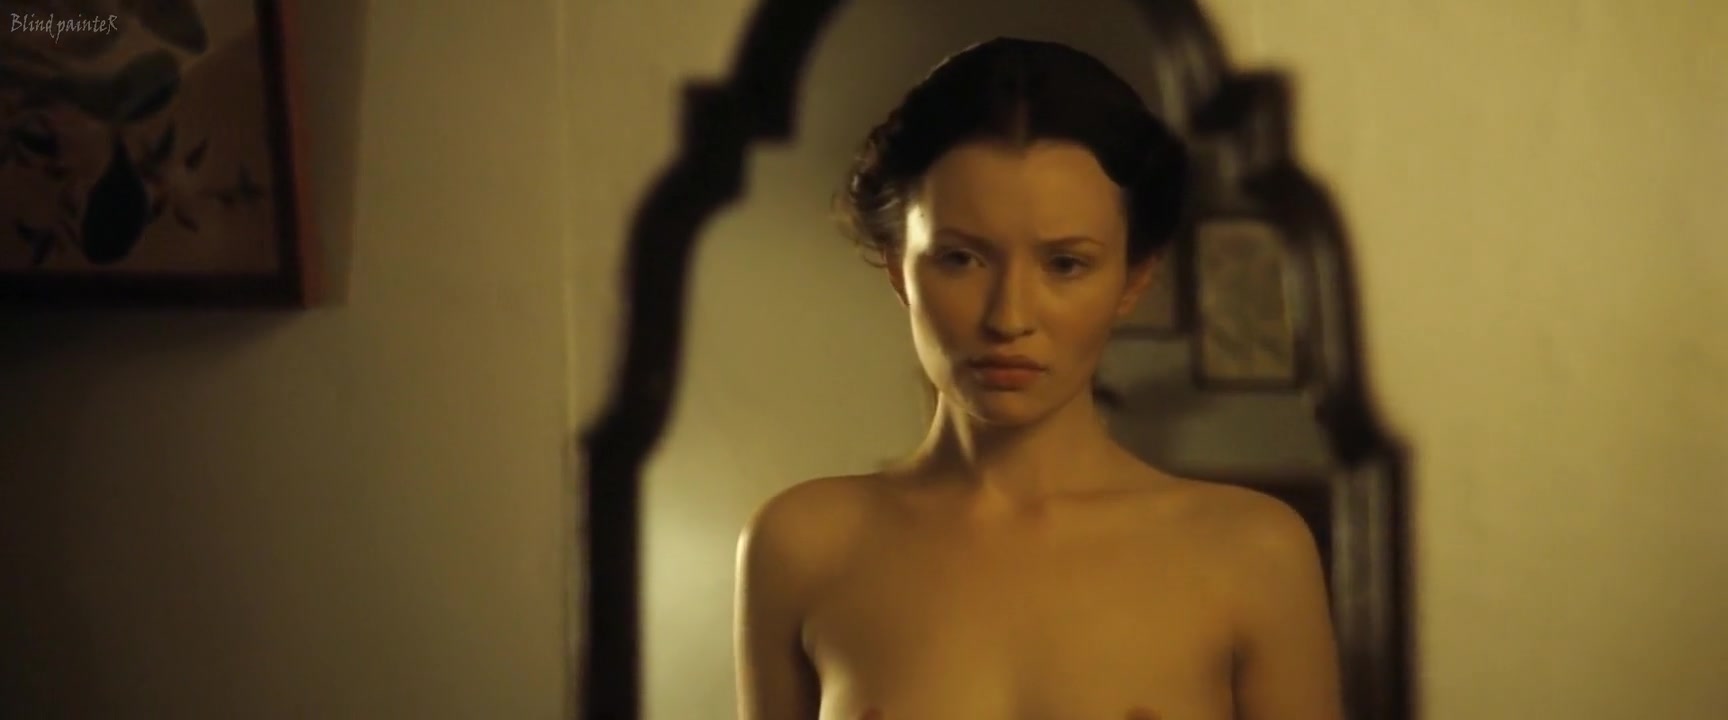 Summer in February (2013) Emily Browning, Mia Austen